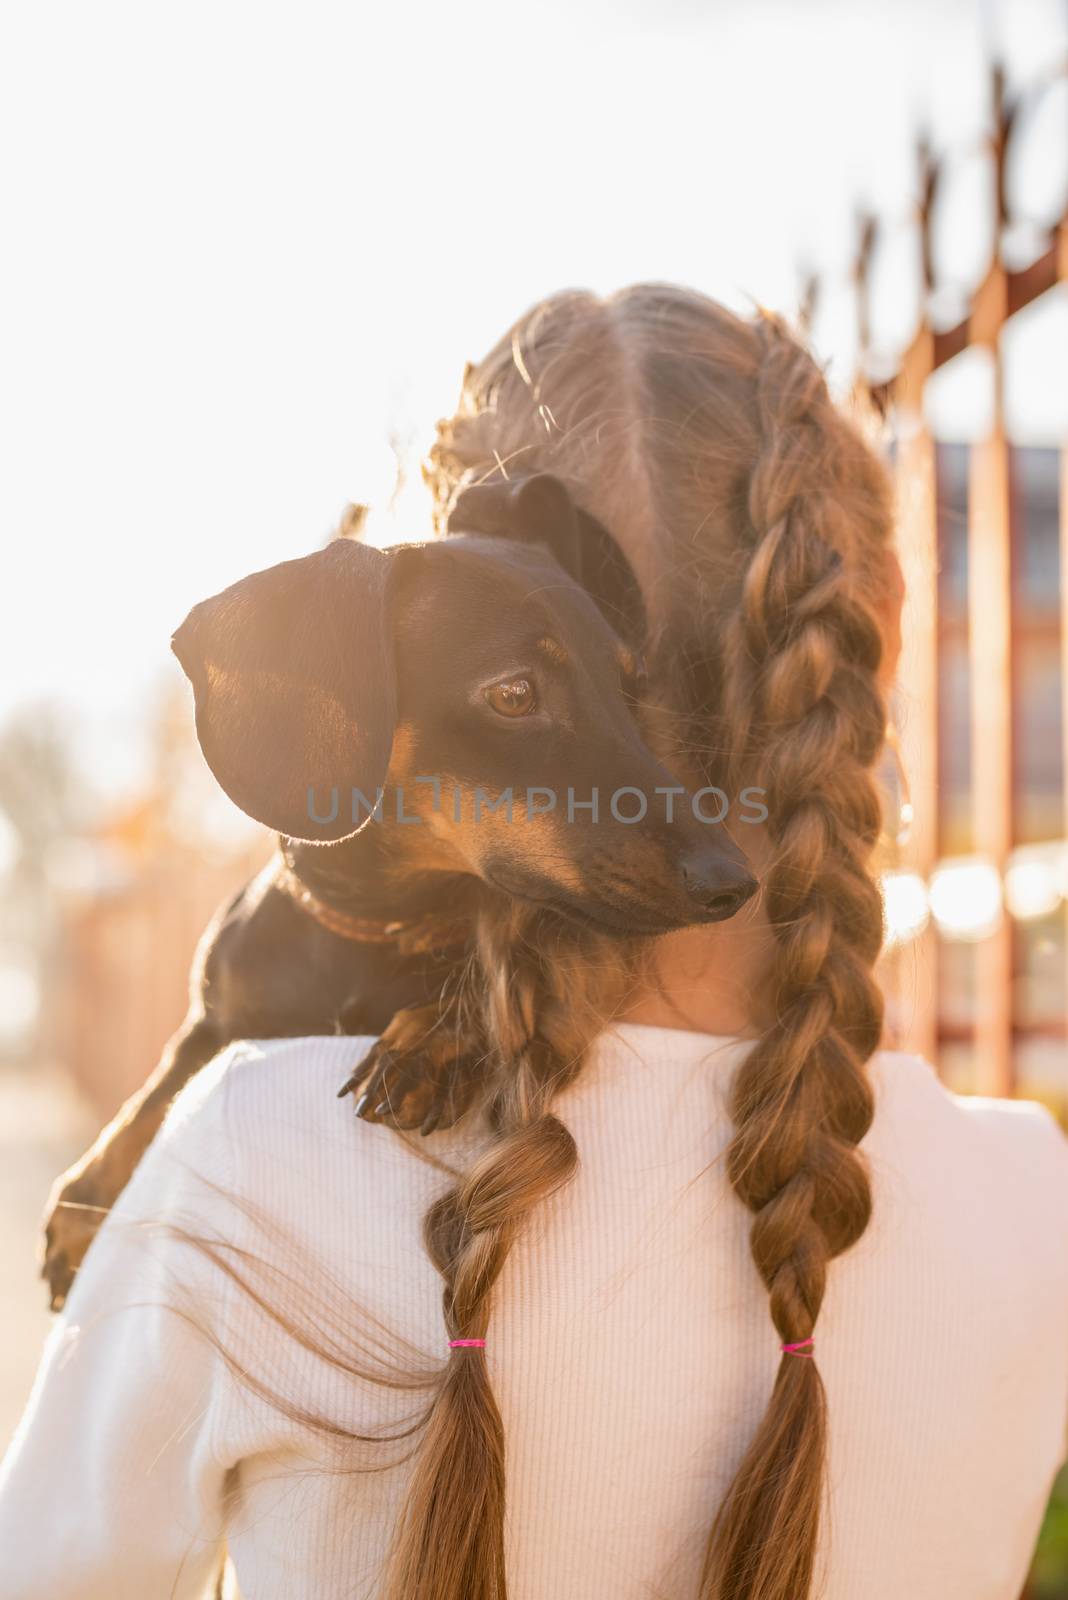 Pet care concept. Young woman with plaited hair holding her dachshund dog in her arms outdoors in sunset. Focus on dog